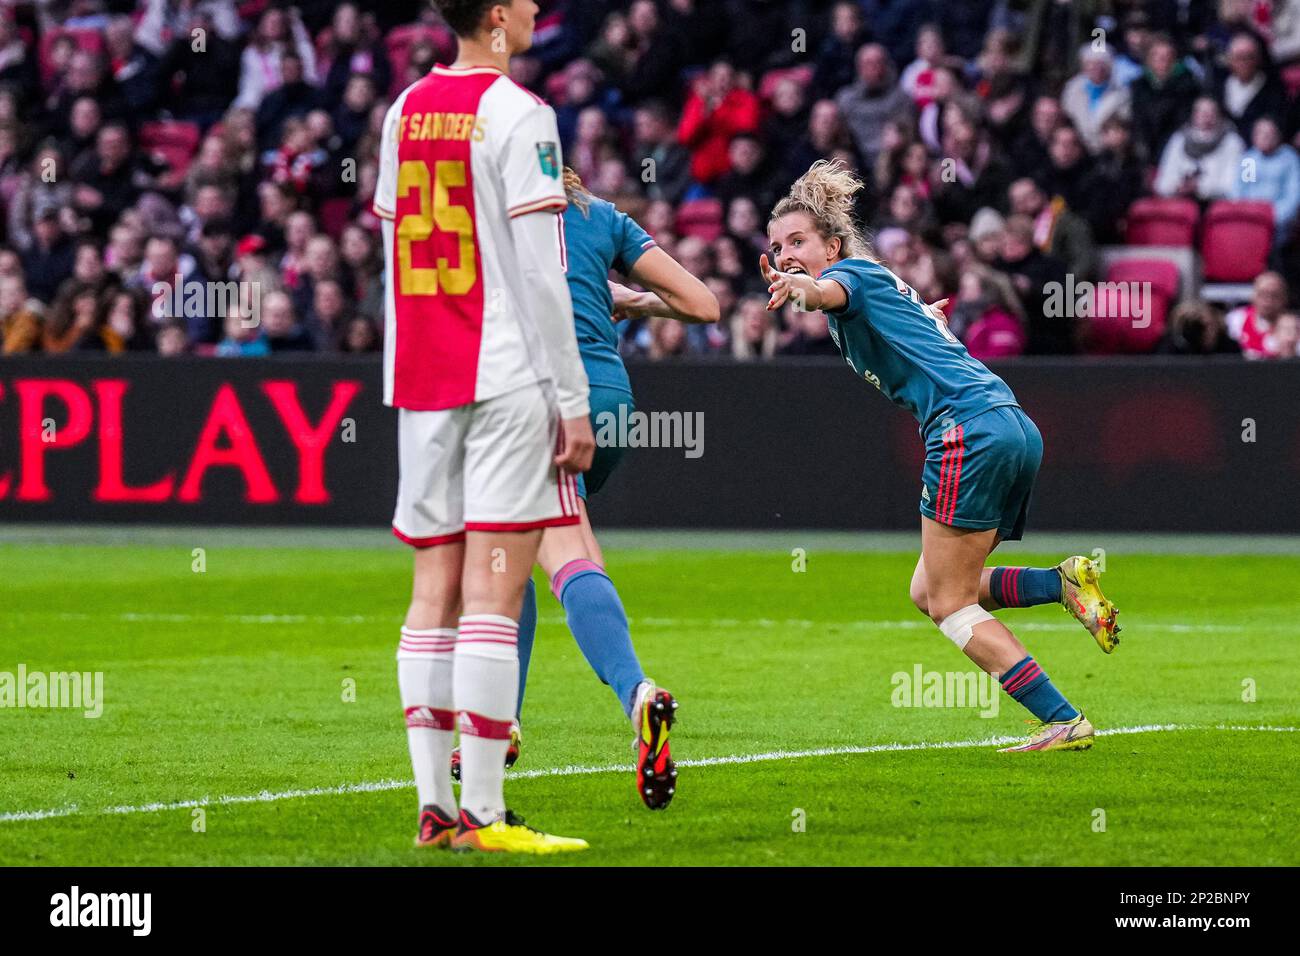 Amsterdam - Esmee de Graaf of Feyenoord V1, Maxime Bennink of Feyenoord V1 celebrate the 0-1 during the match between Ajax V1 v Feyenoord V1 at Johan Cruyff Arena on 4 March 2023 in Amsterdam, Netherlands. (Box to Box Pictures/Yannick Verhoeven) Stock Photo